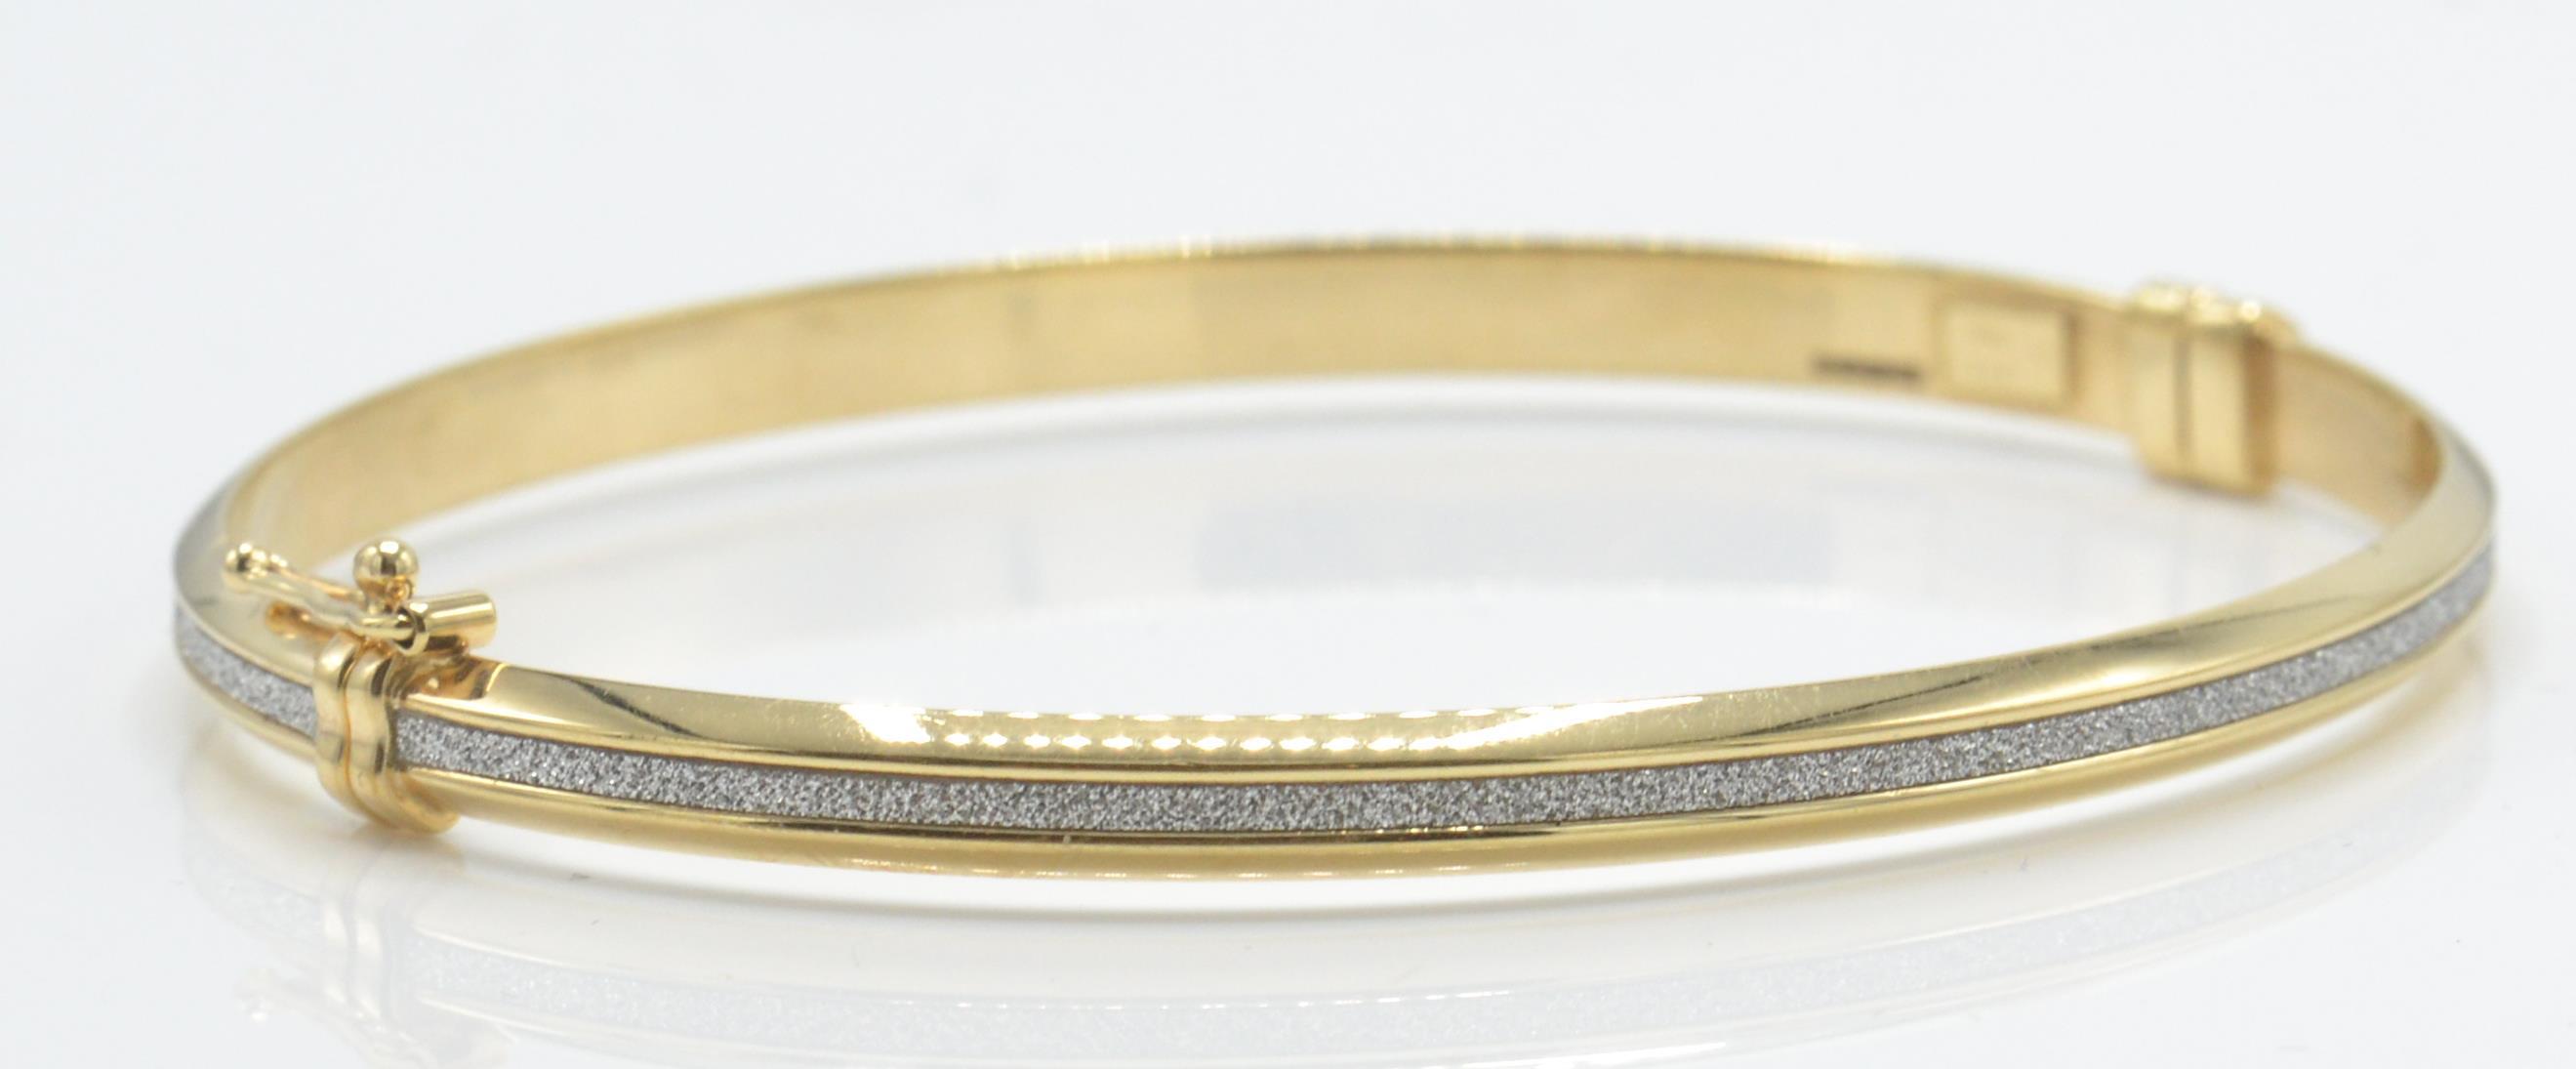 A Hallmarked 9ct White & Yellow Gold Bangle - Image 3 of 5